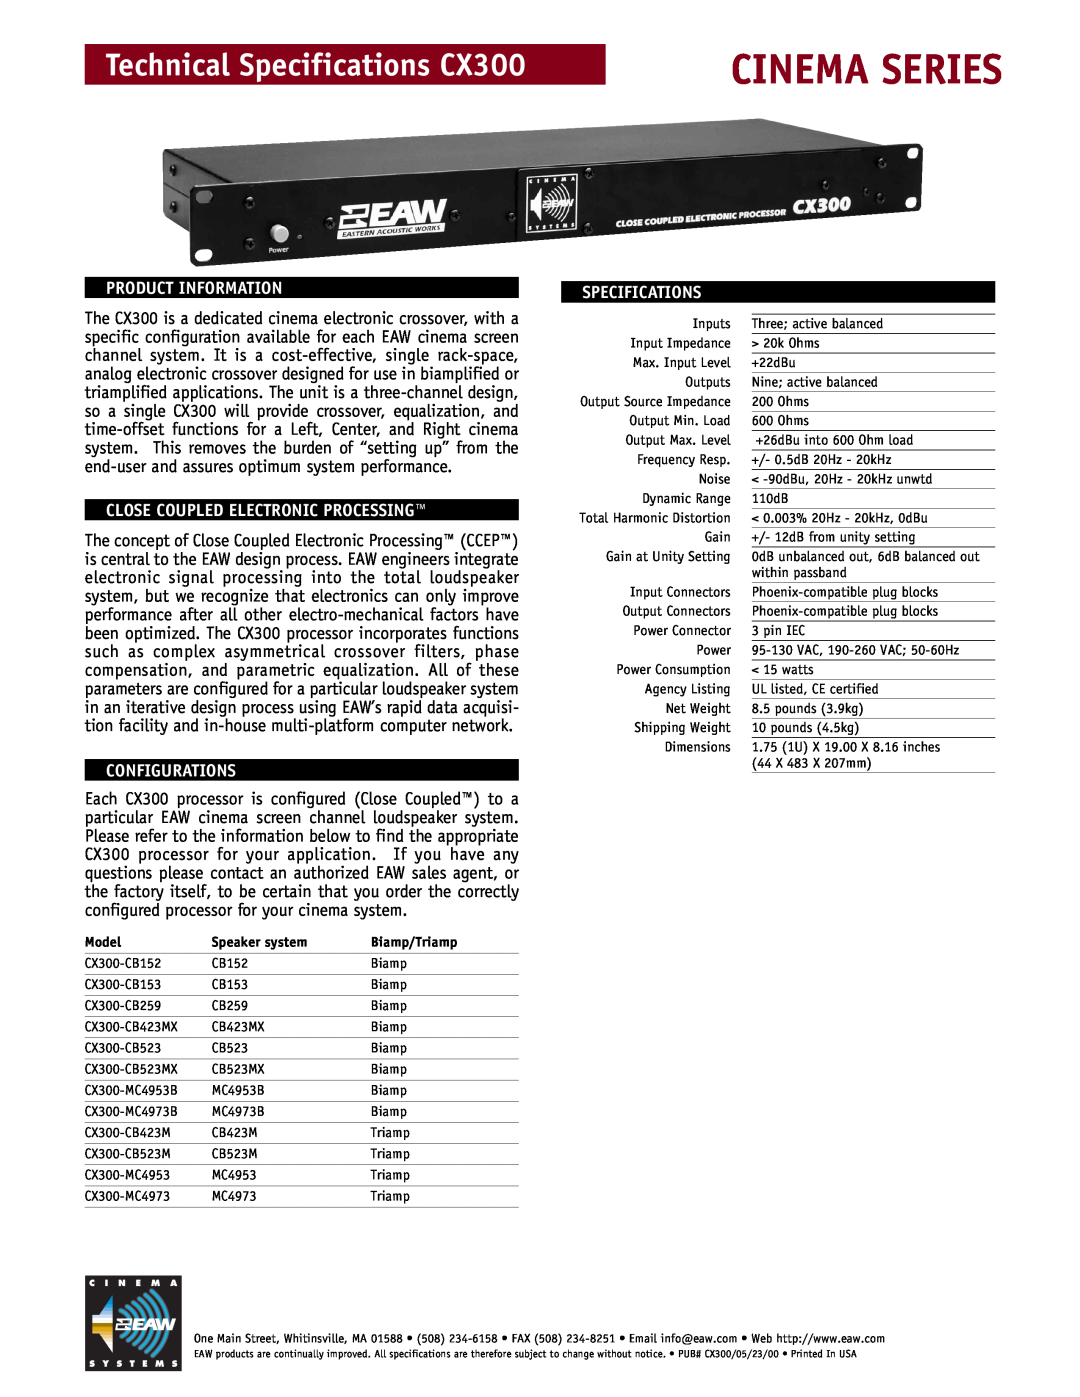 EAW technical specifications Cinema Series, Technical Specifications CX300, Product Information, Configurations, Model 